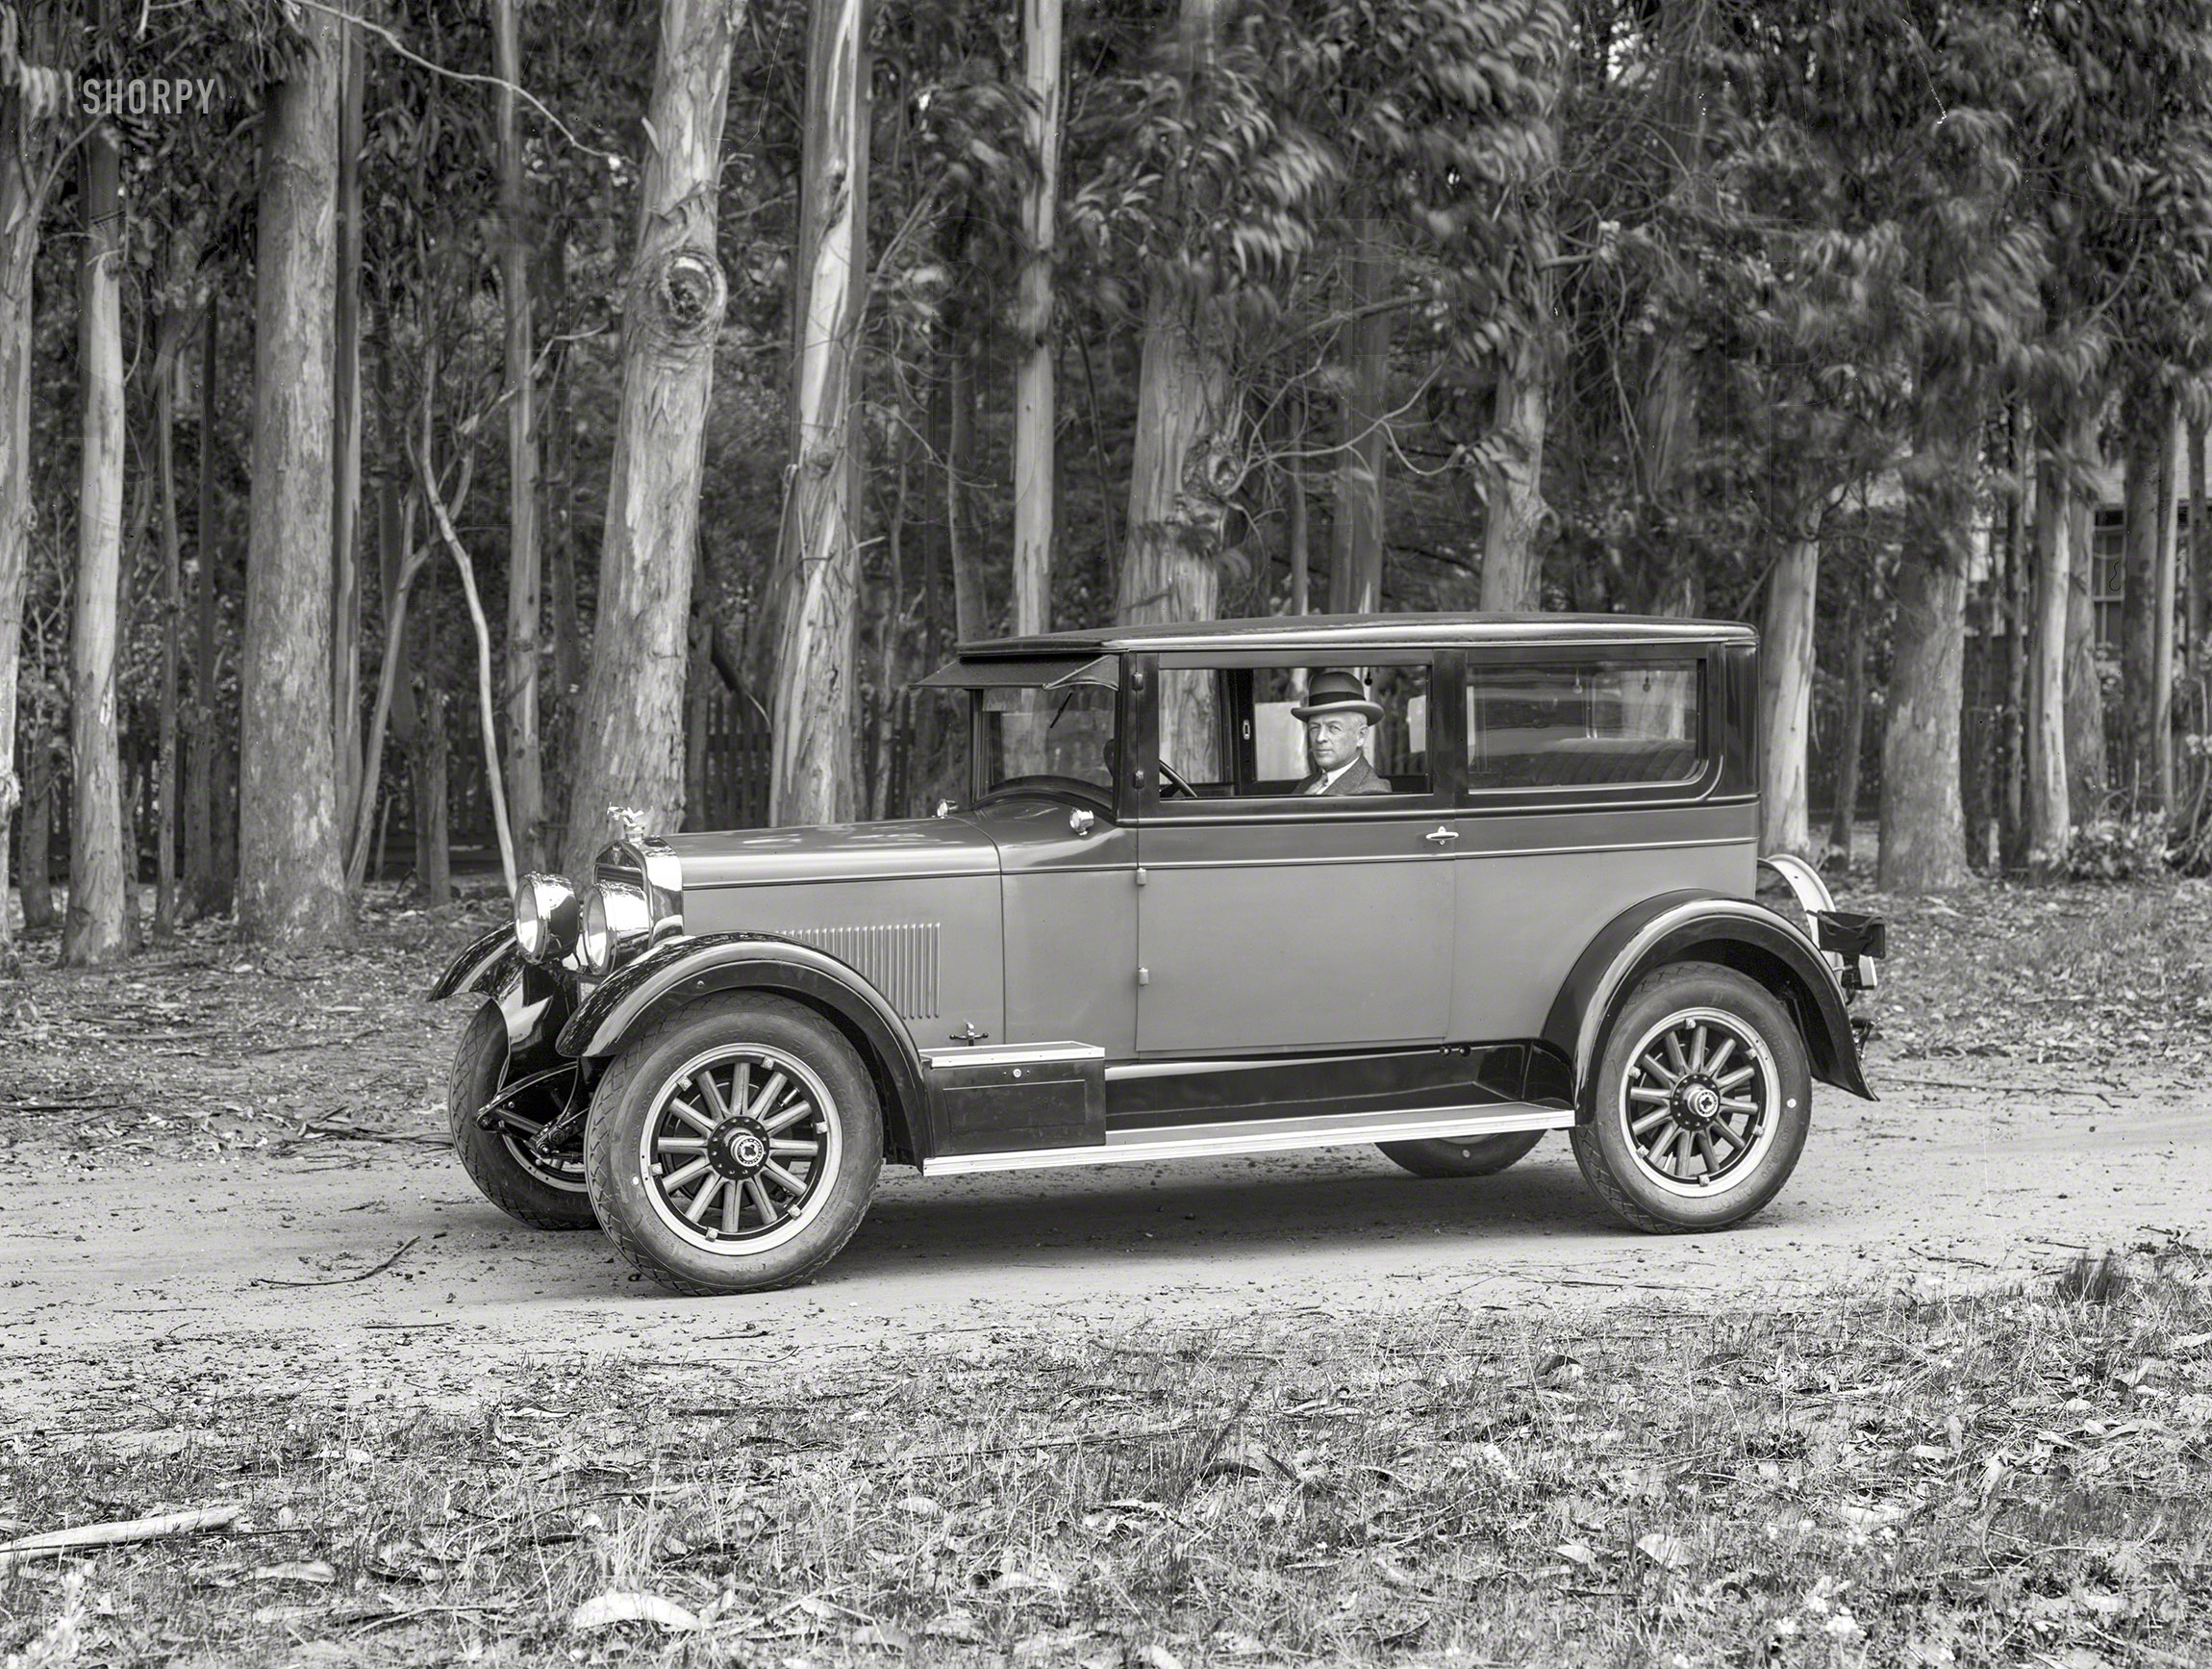 San Francisco, 1926. "Rickenbacker coupe." Today's selection from the Shorpy Archive of Arboreal Autos. 5x7 glass negative by Chris Helin. View full size.